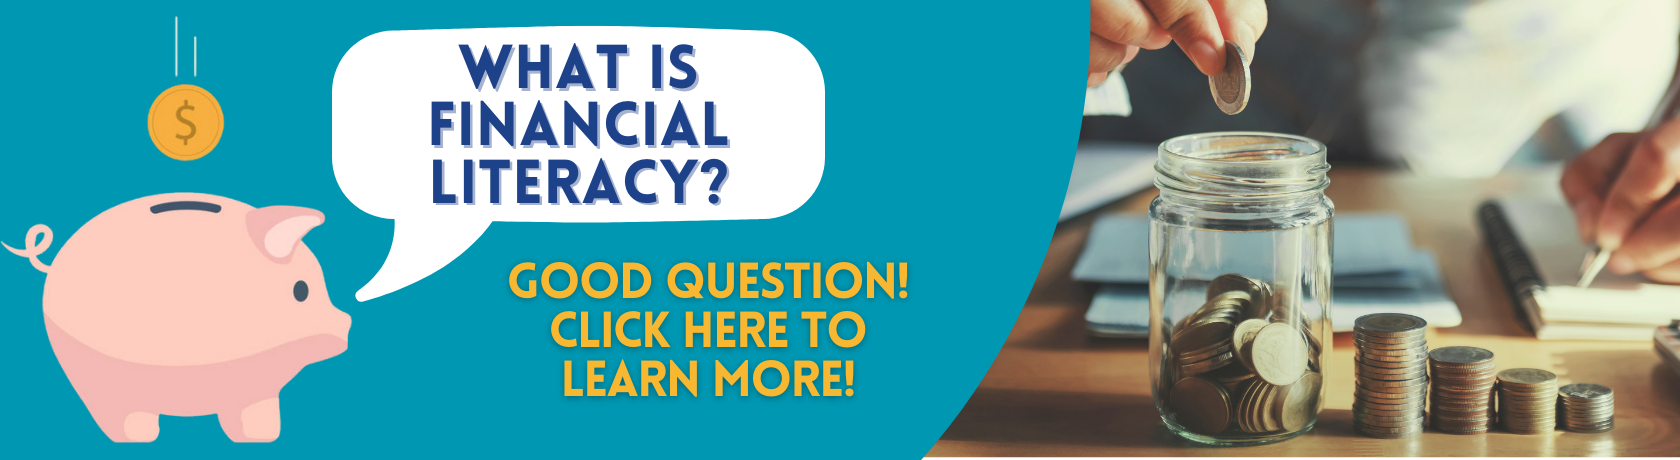 What is financial literacy?